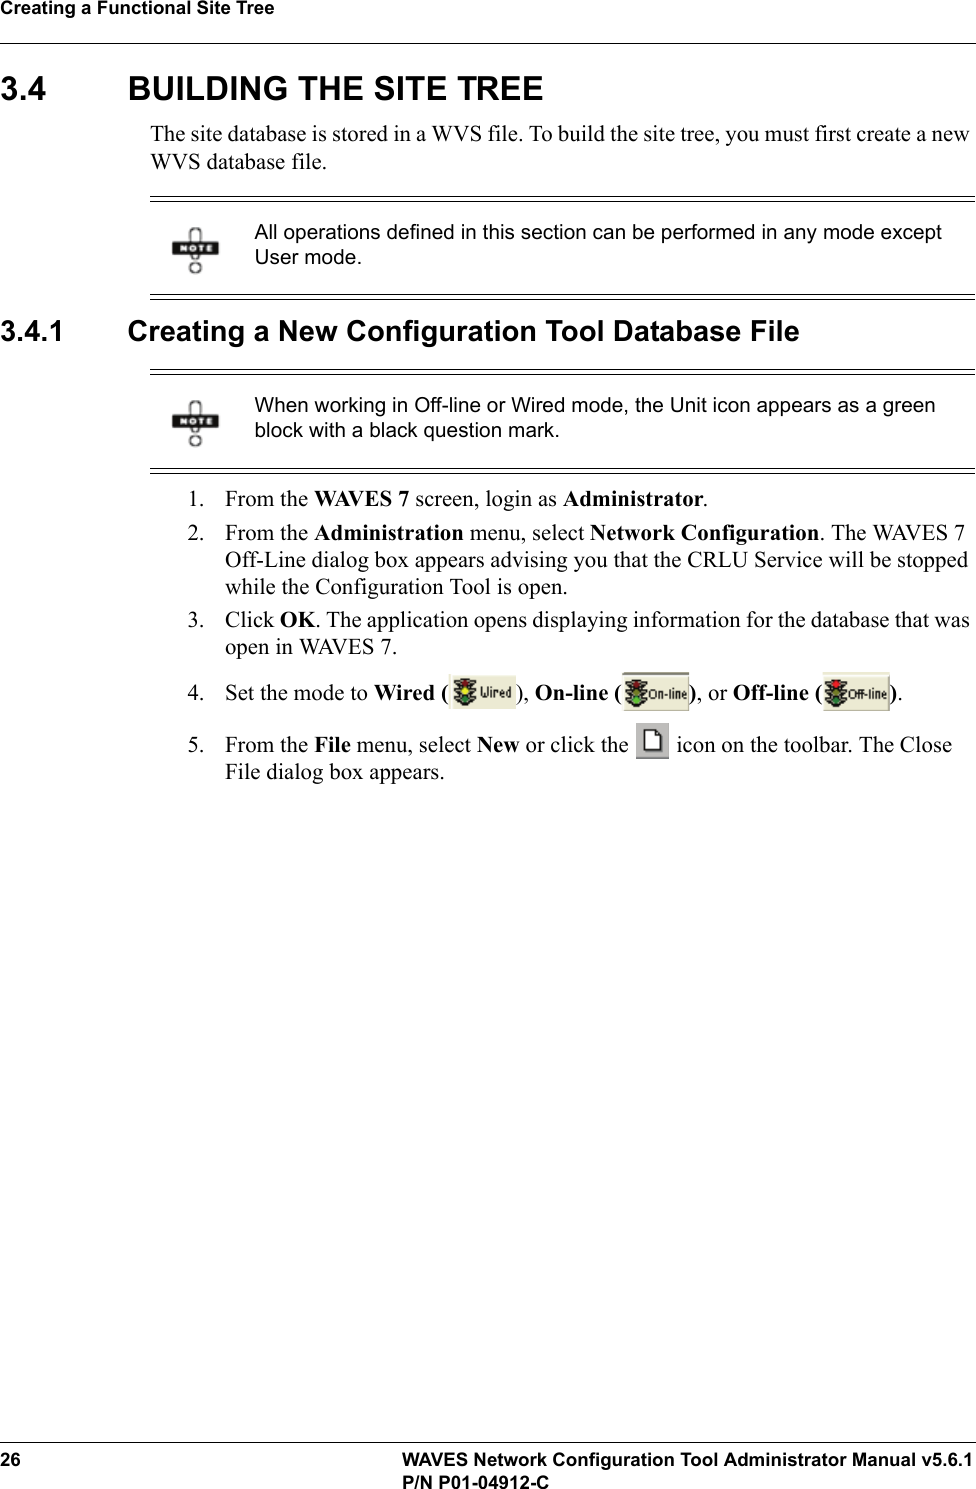 Creating a Functional Site Tree26 WAVES Network Configuration Tool Administrator Manual v5.6.1P/N P01-04912-C3.4 BUILDING THE SITE TREEThe site database is stored in a WVS file. To build the site tree, you must first create a new WVS database file.3.4.1 Creating a New Configuration Tool Database File1. From the WAVES 7 screen, login as Administrator.2. From the Administration menu, select Network Configuration. The WAVES 7 Off-Line dialog box appears advising you that the CRLU Service will be stopped while the Configuration Tool is open.3. Click OK. The application opens displaying information for the database that was open in WAVES 7.4. Set the mode to Wired ( ), On-line ( ), or Off-line ( ).5. From the File menu, select New or click the   icon on the toolbar. The Close File dialog box appears. All operations defined in this section can be performed in any mode except User mode.When working in Off-line or Wired mode, the Unit icon appears as a green block with a black question mark.